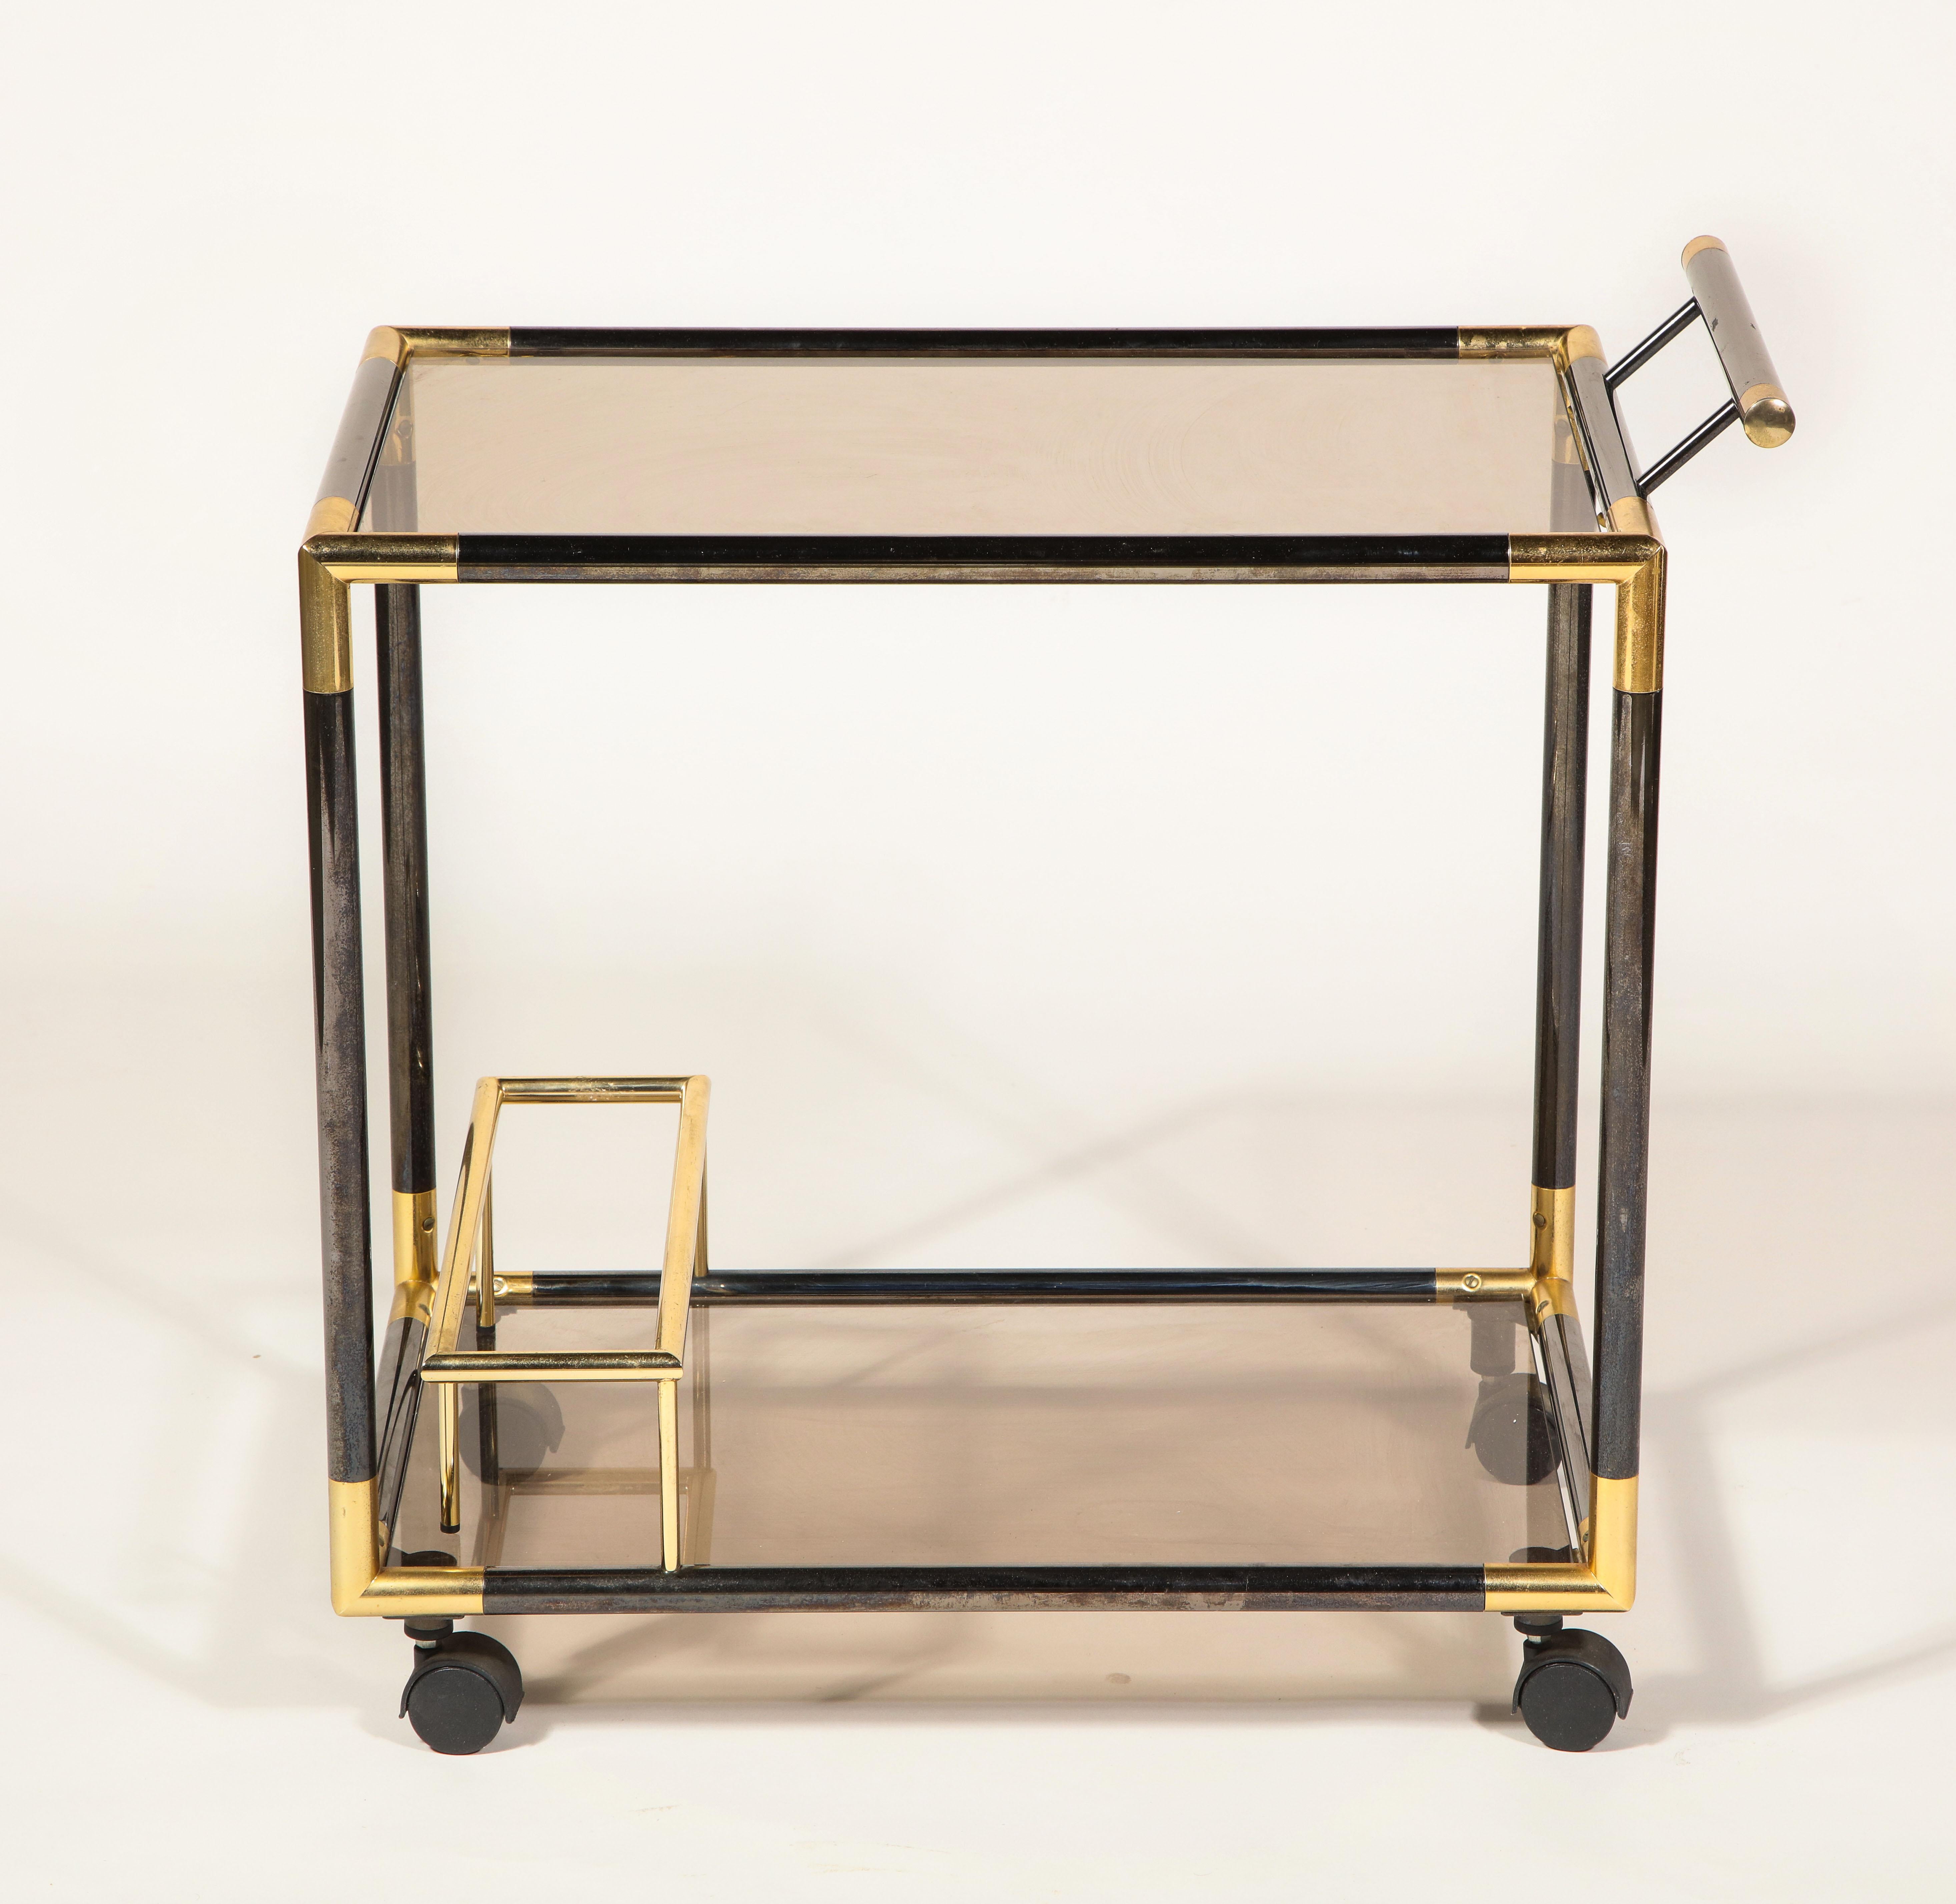 Gunmetal and brass bar cart, France, 1980s.

Chic bar cart with smoked glass and gunmetal and brass detailing throughout. Although this was thought to be from Italy it is imported from France.